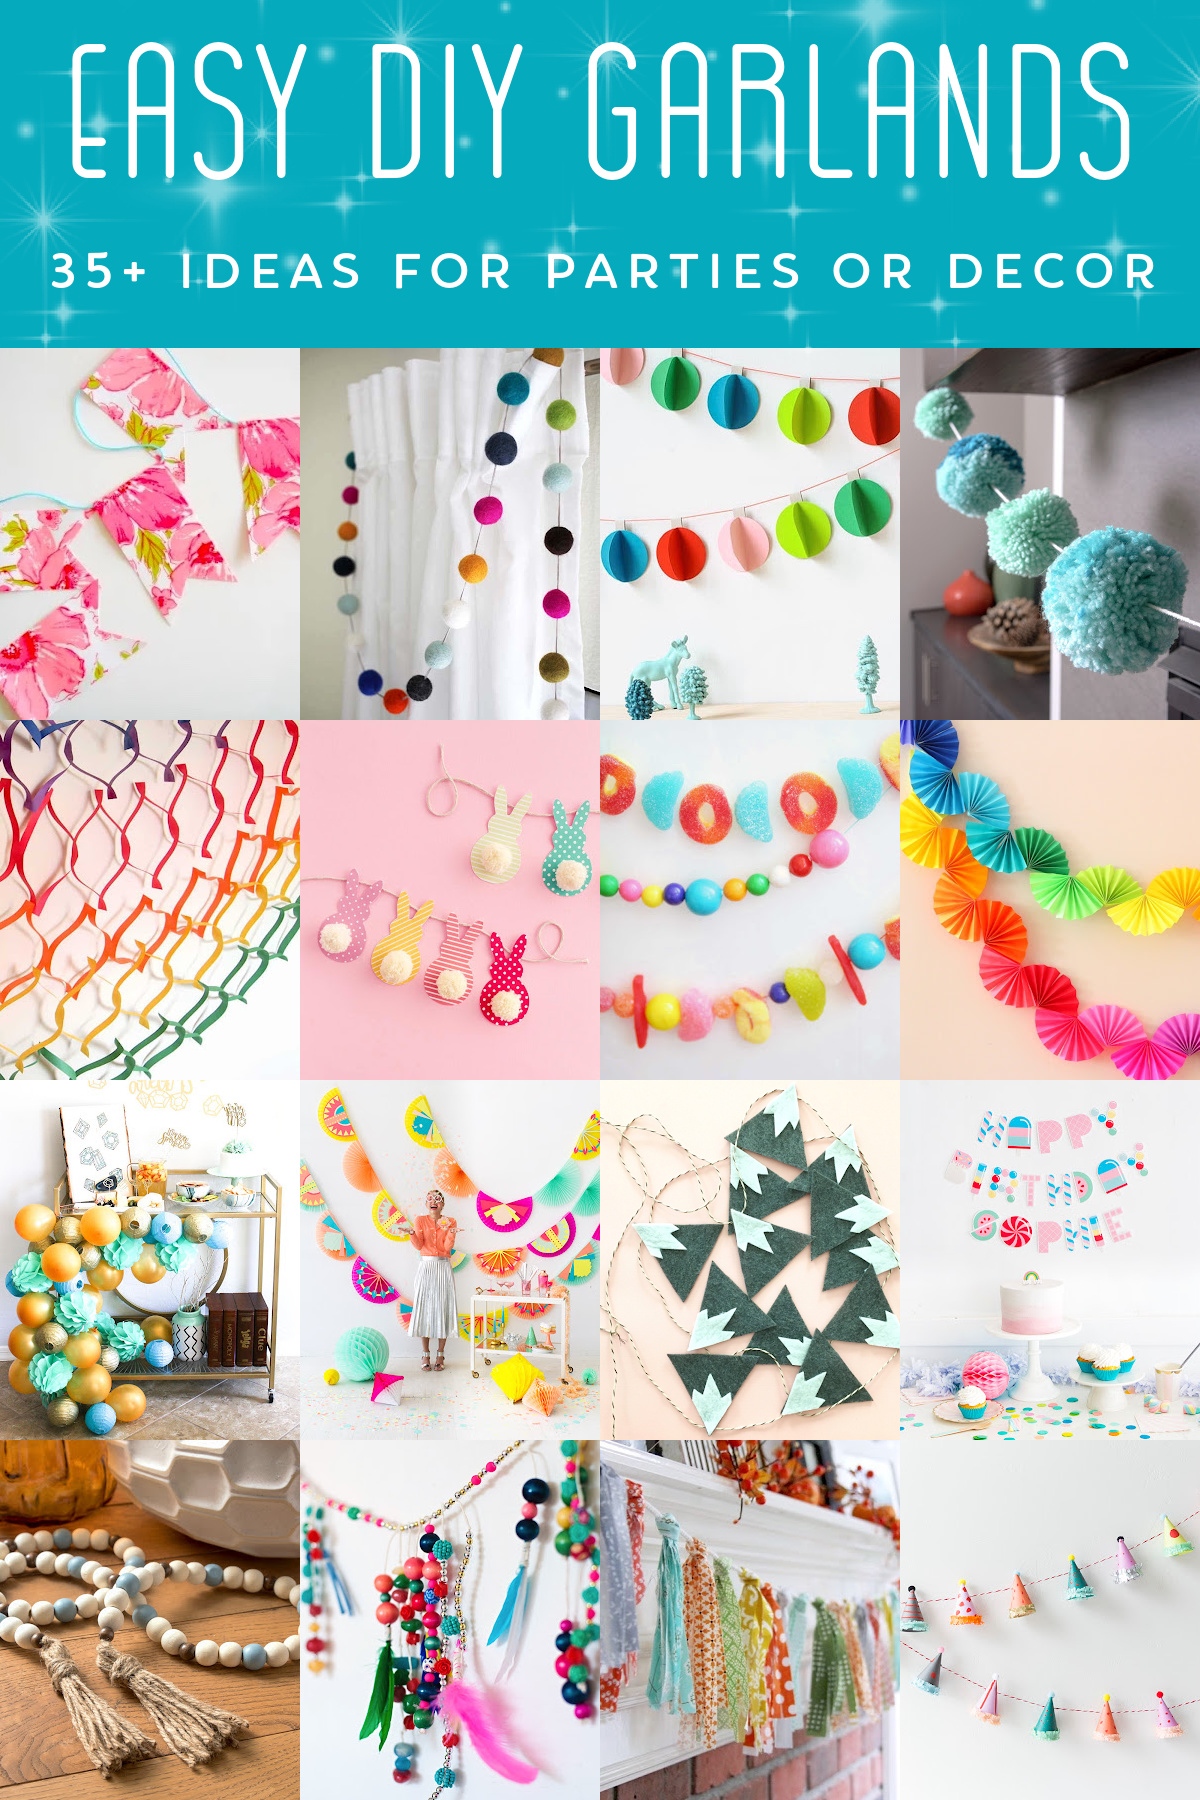 Festive DIY Garlands: Add a Personal Touch to Your Decor - DIY Candy